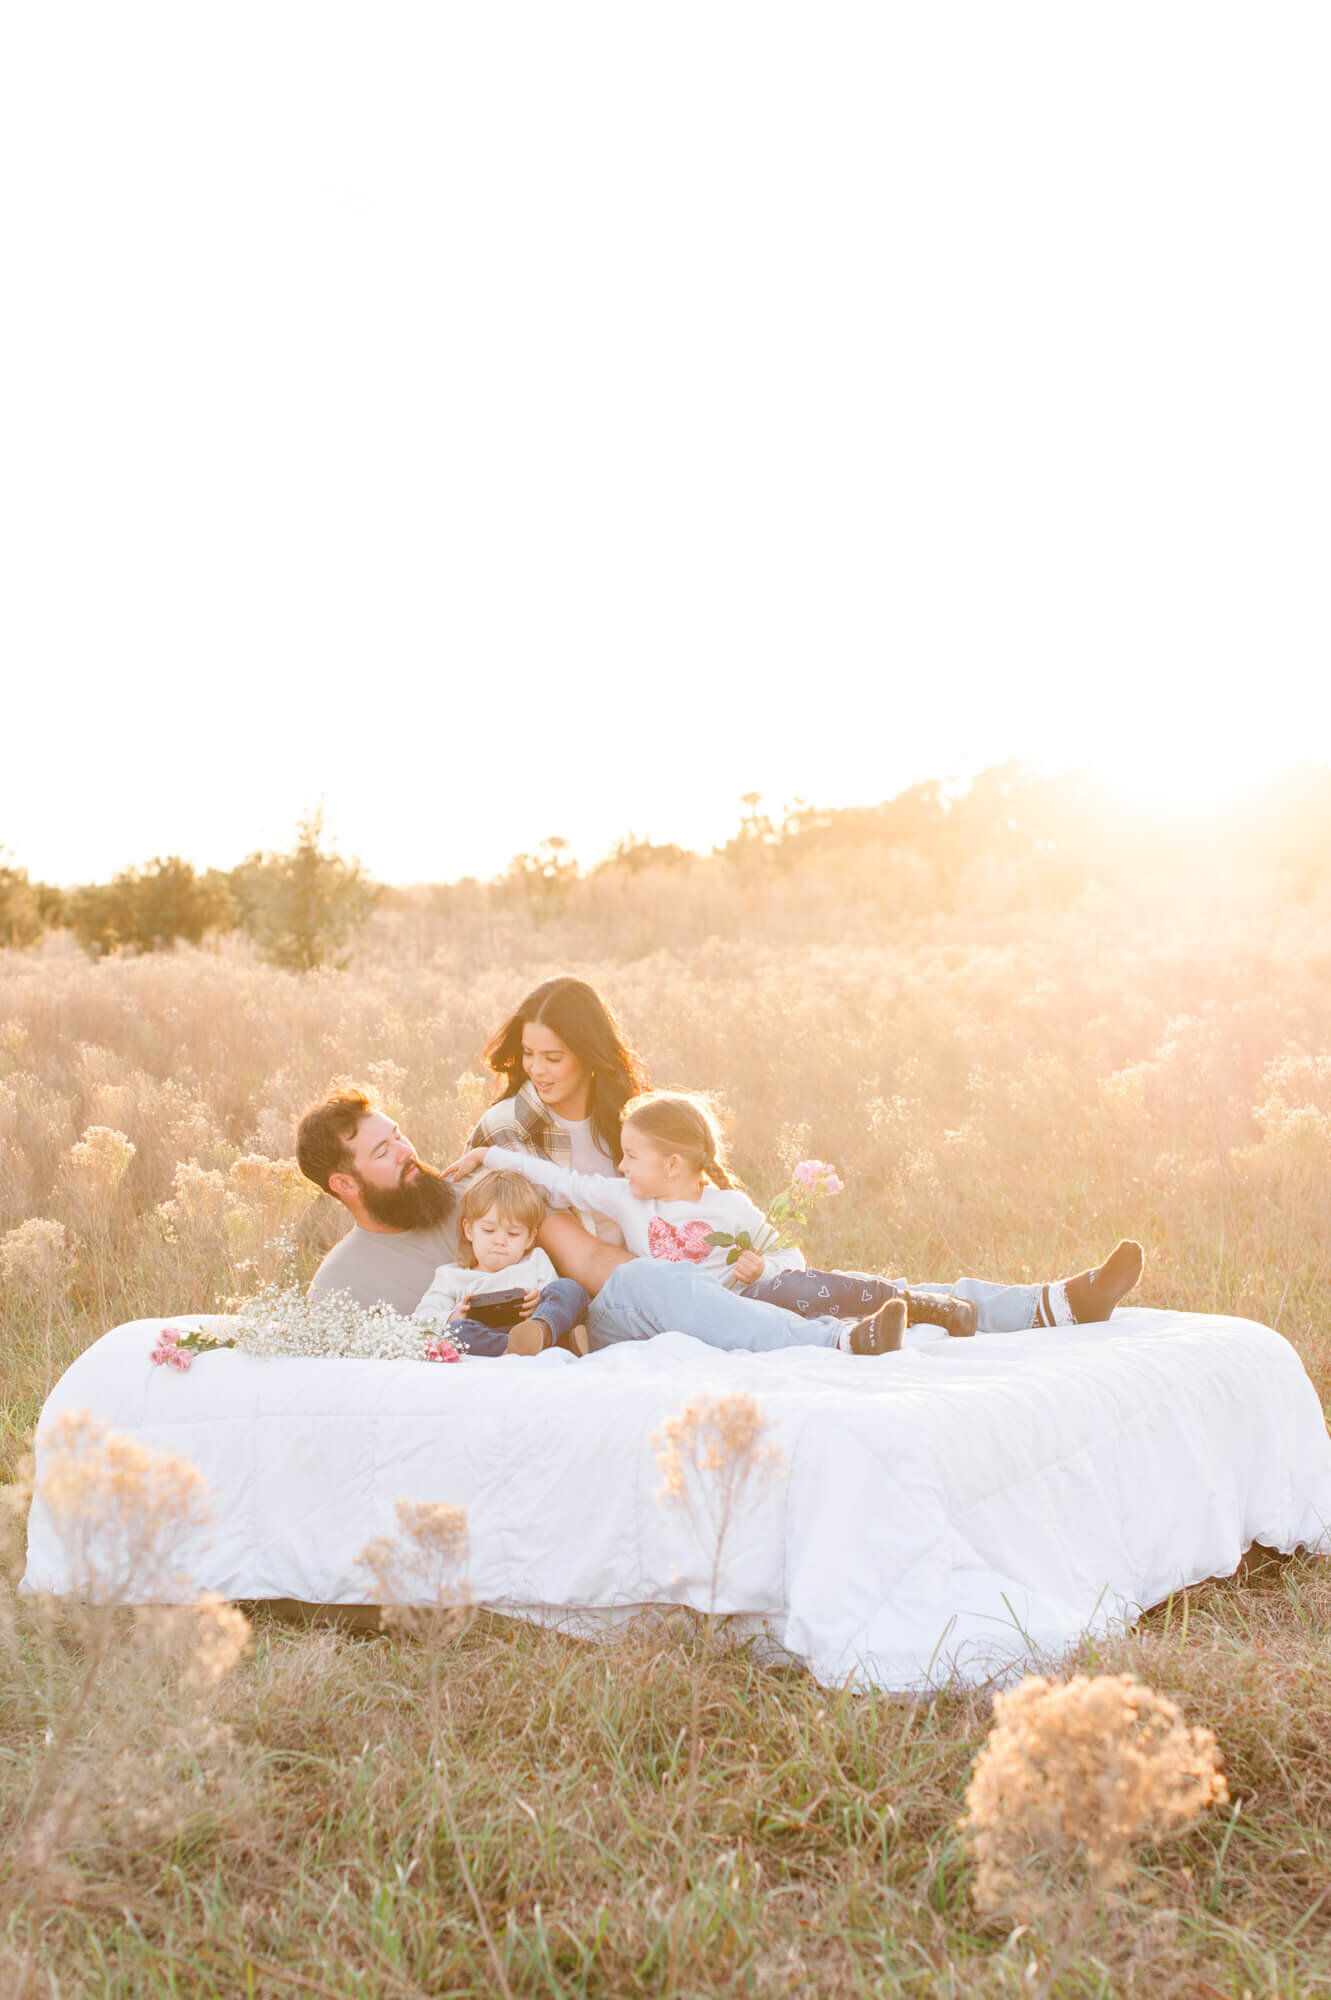 Orlando family laying on an air mattress in the middle of a field at sunset with gorgeous fluffy pampas all around them